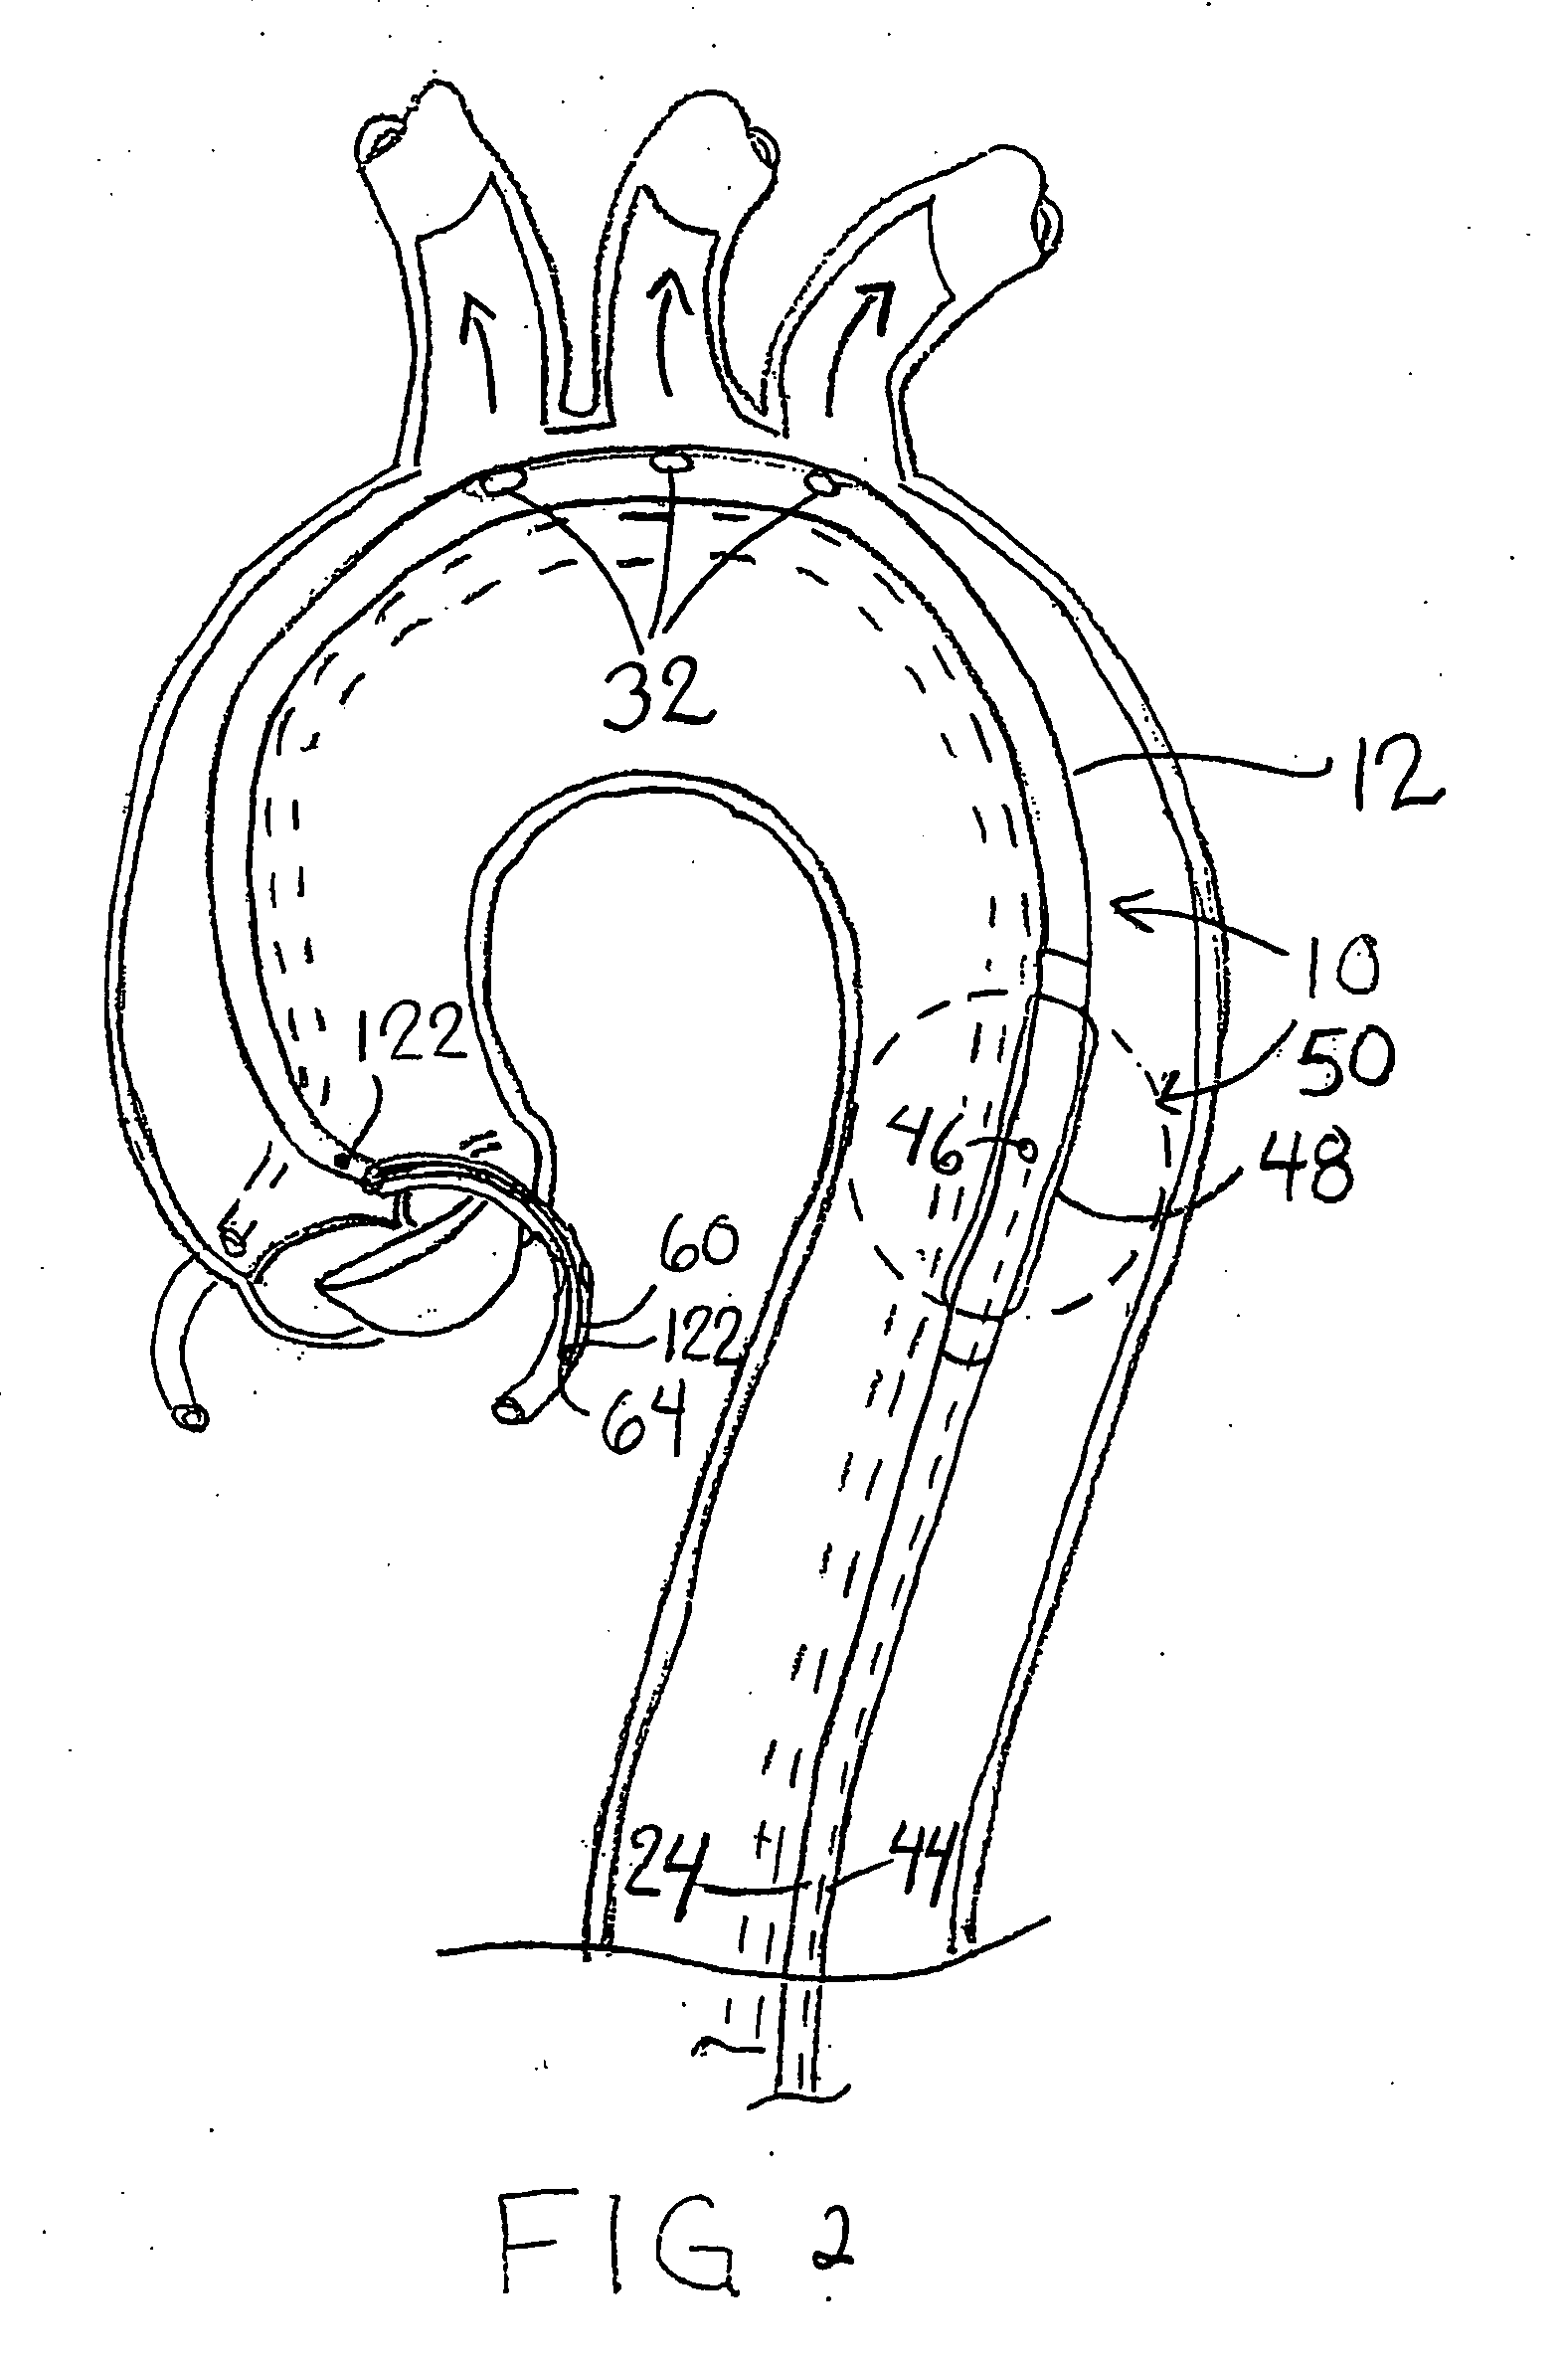 Method and apparatus for treating acute myocardial infarction with hypothermic perfusion